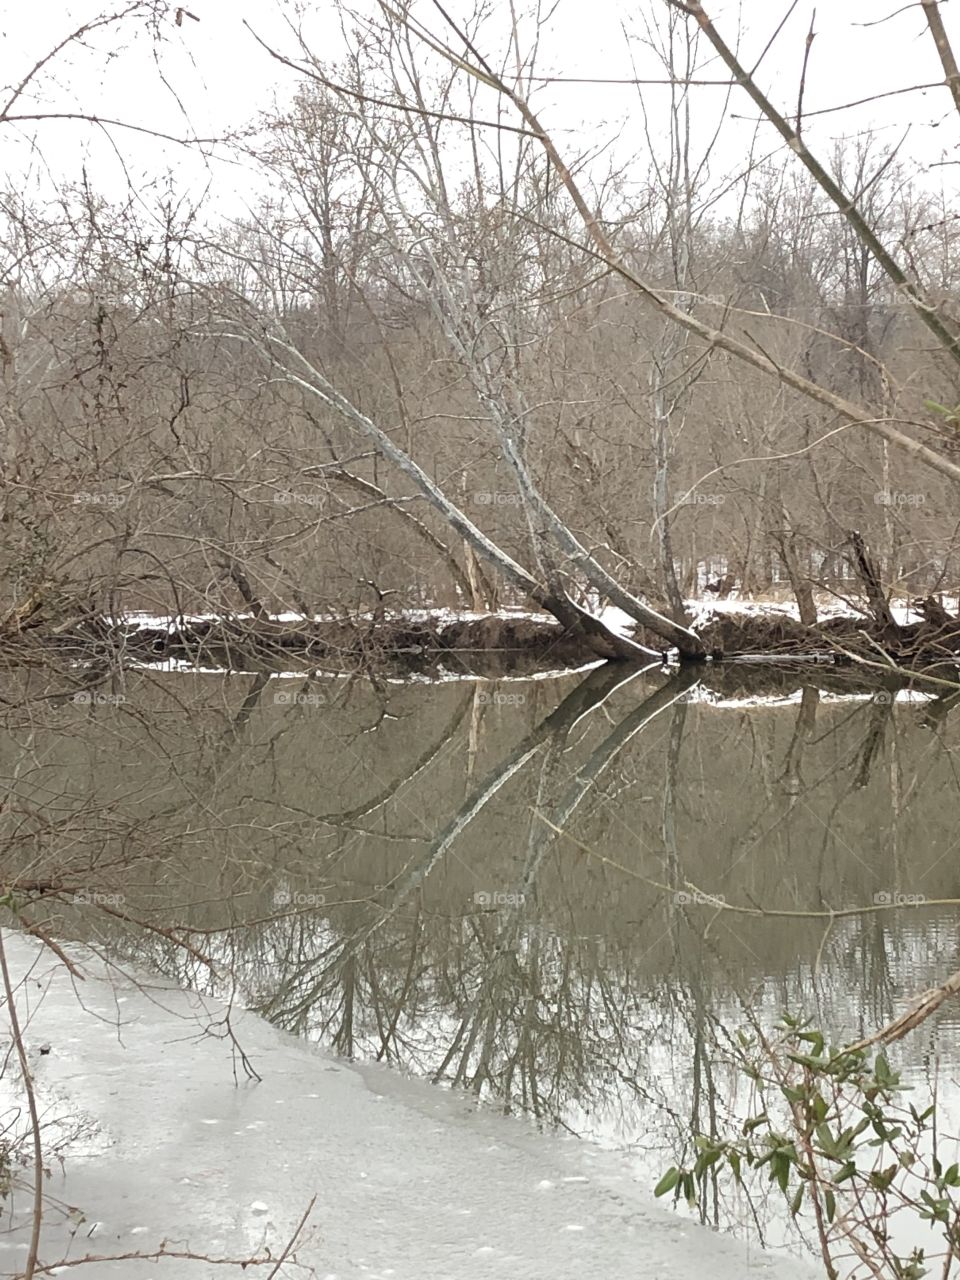 An incredible reflection on a river in Virginia’s bitter winter